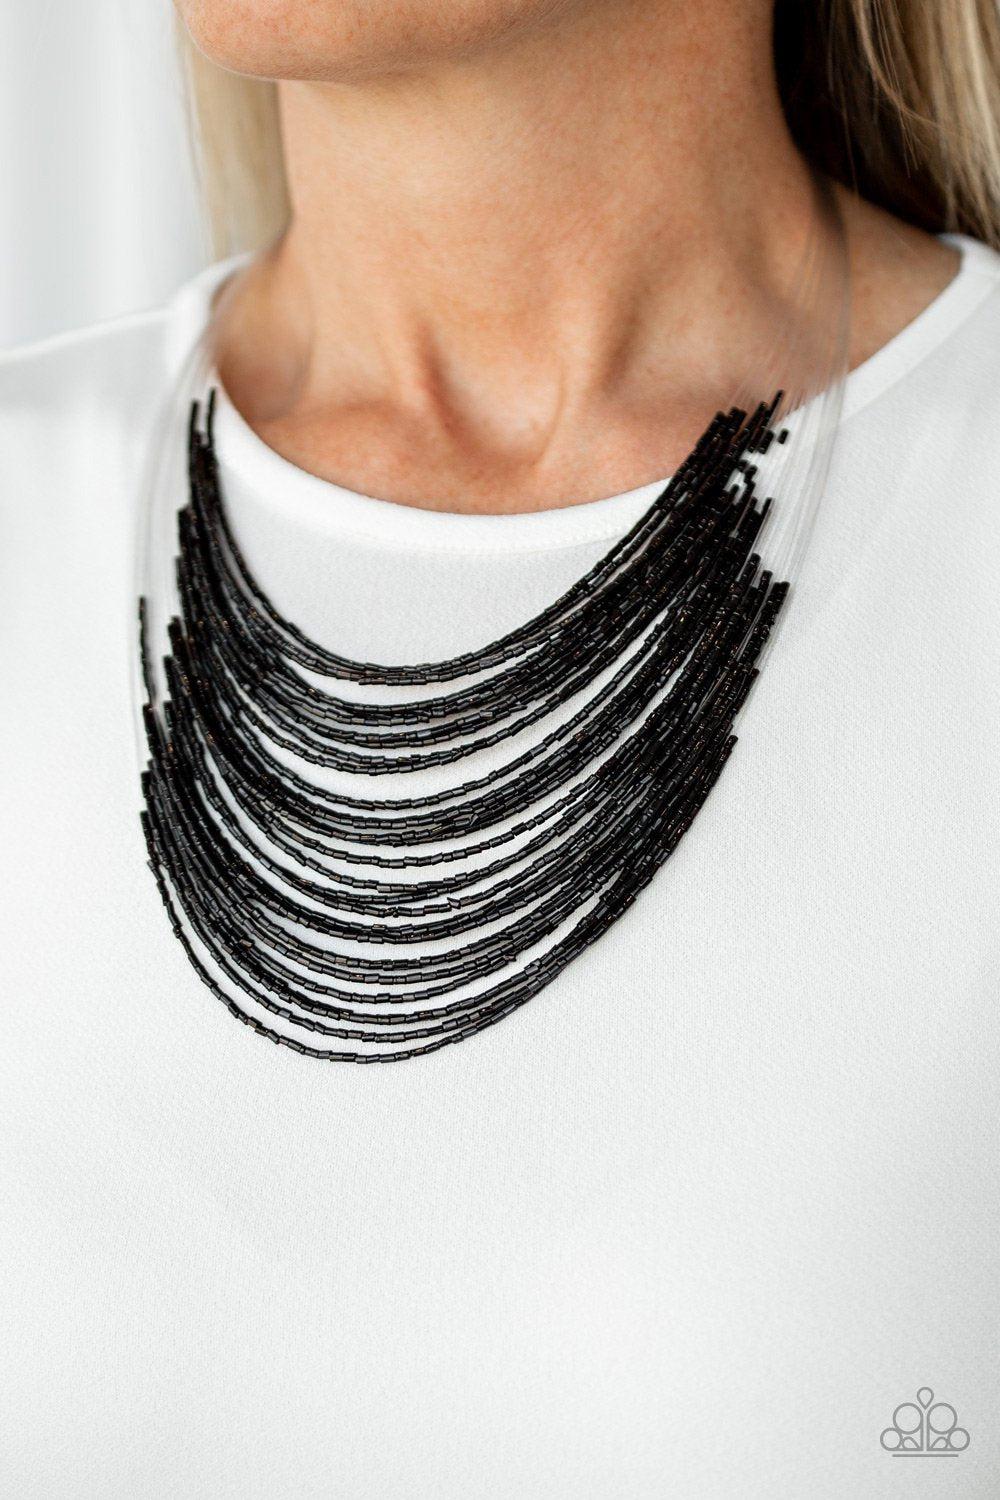 Catwalk Queen Black Seed Bead Necklace - Paparazzi Accessories- lightbox - CarasShop.com - $5 Jewelry by Cara Jewels